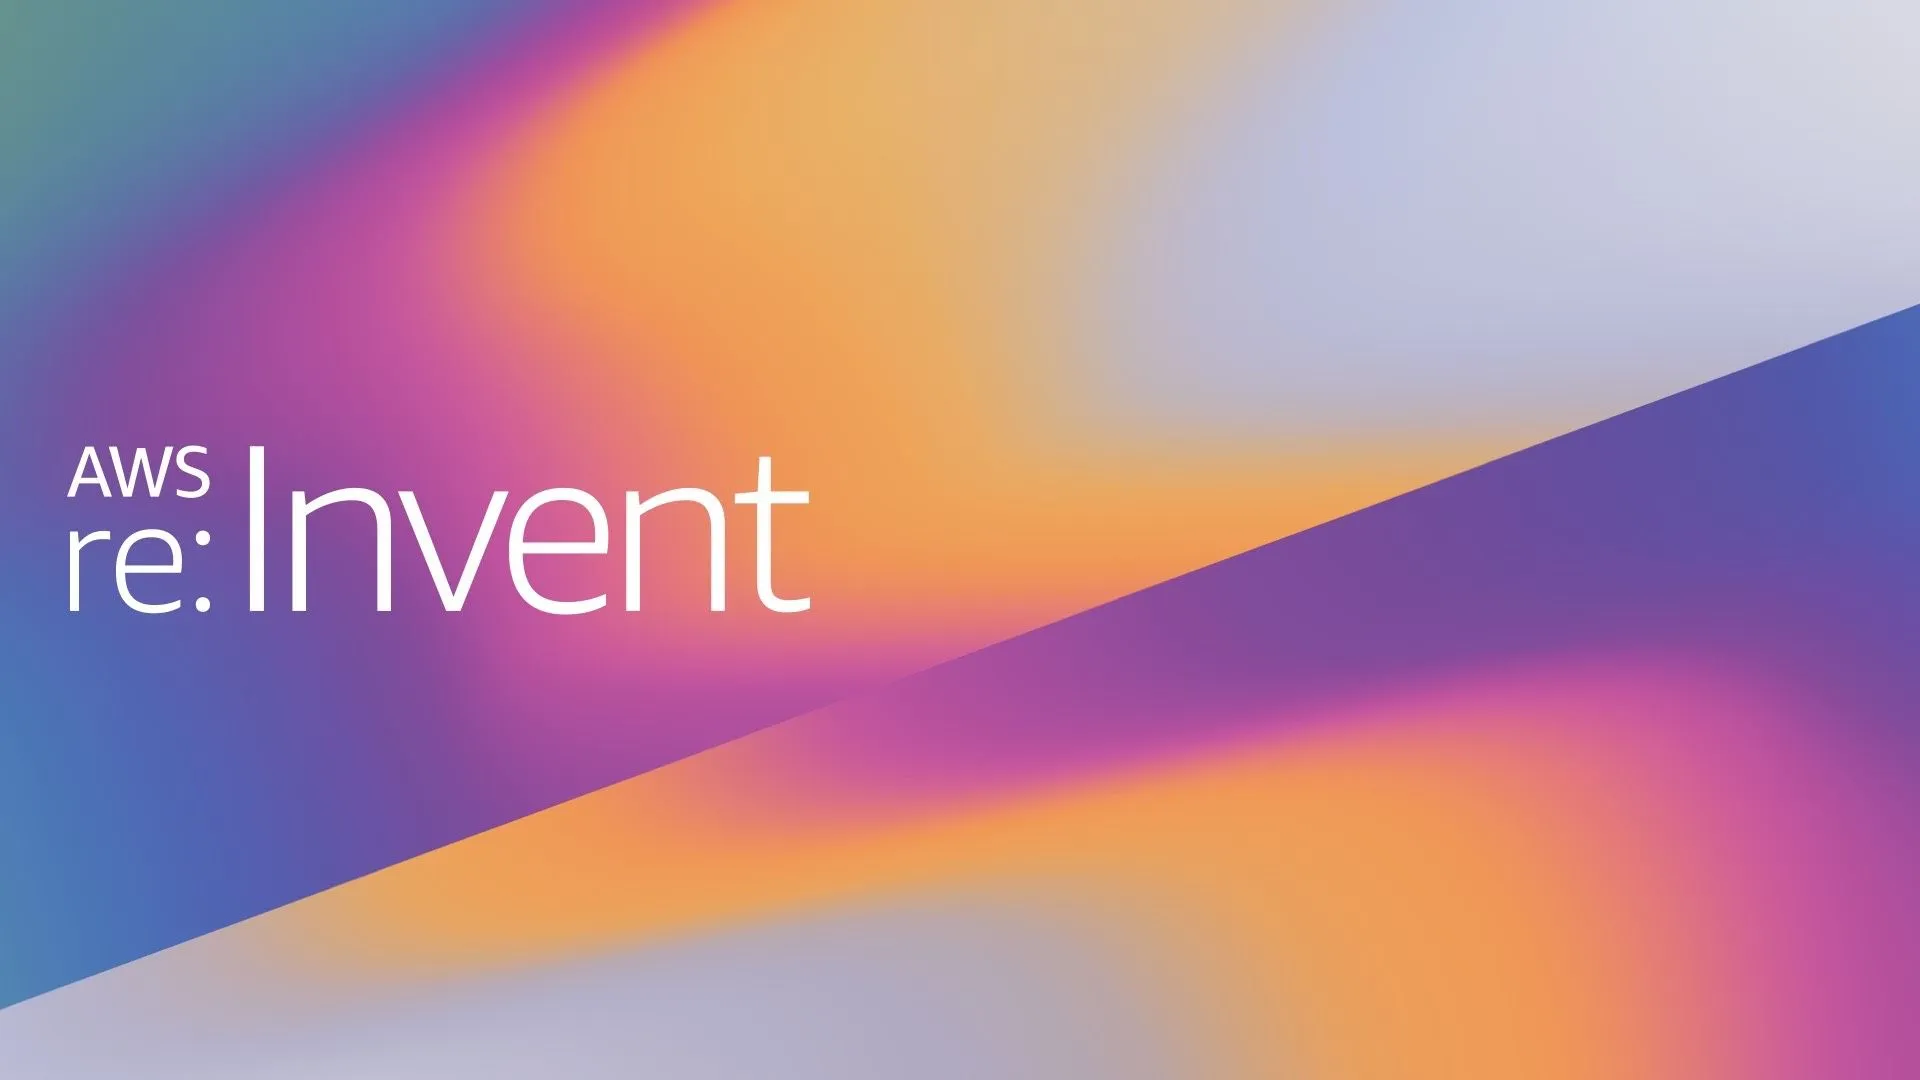 All Things AWS re:Invent 2019